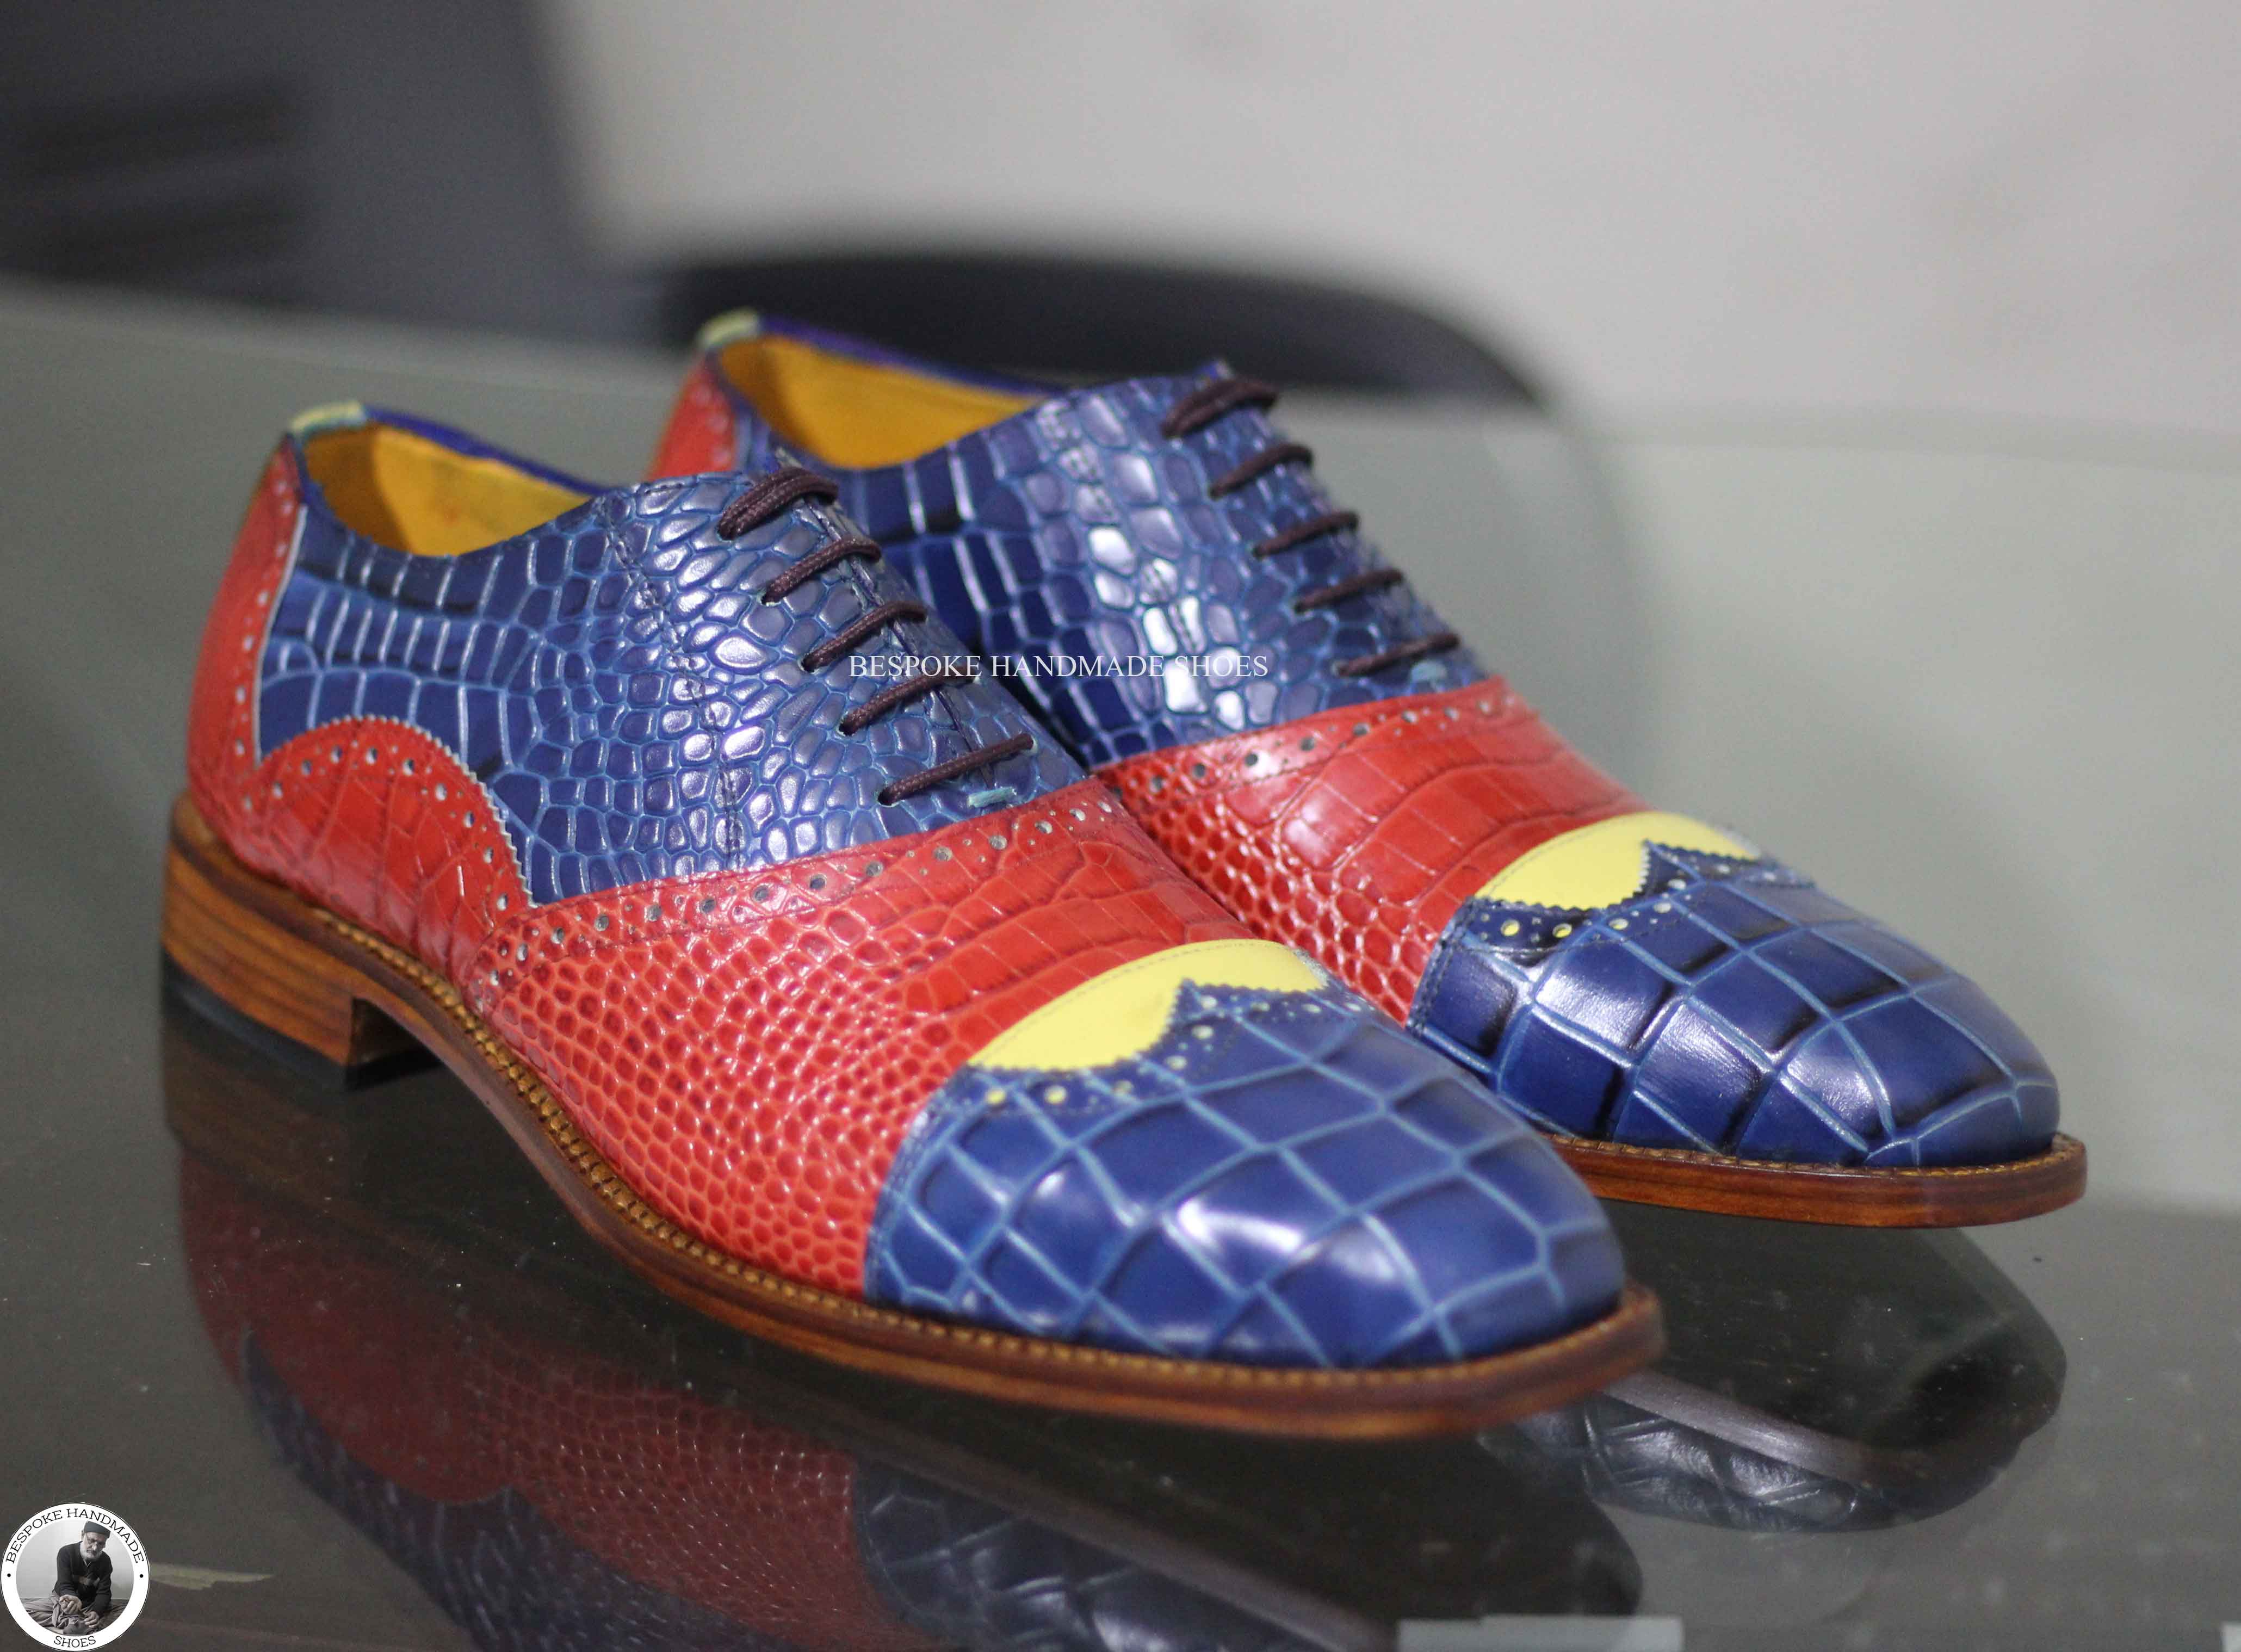 Handmade Men's Dress Shoes,  Red, Yellow, Blue Alligator Print Leather Oxford Wingtip Lace Up Stylish Men's Shoes